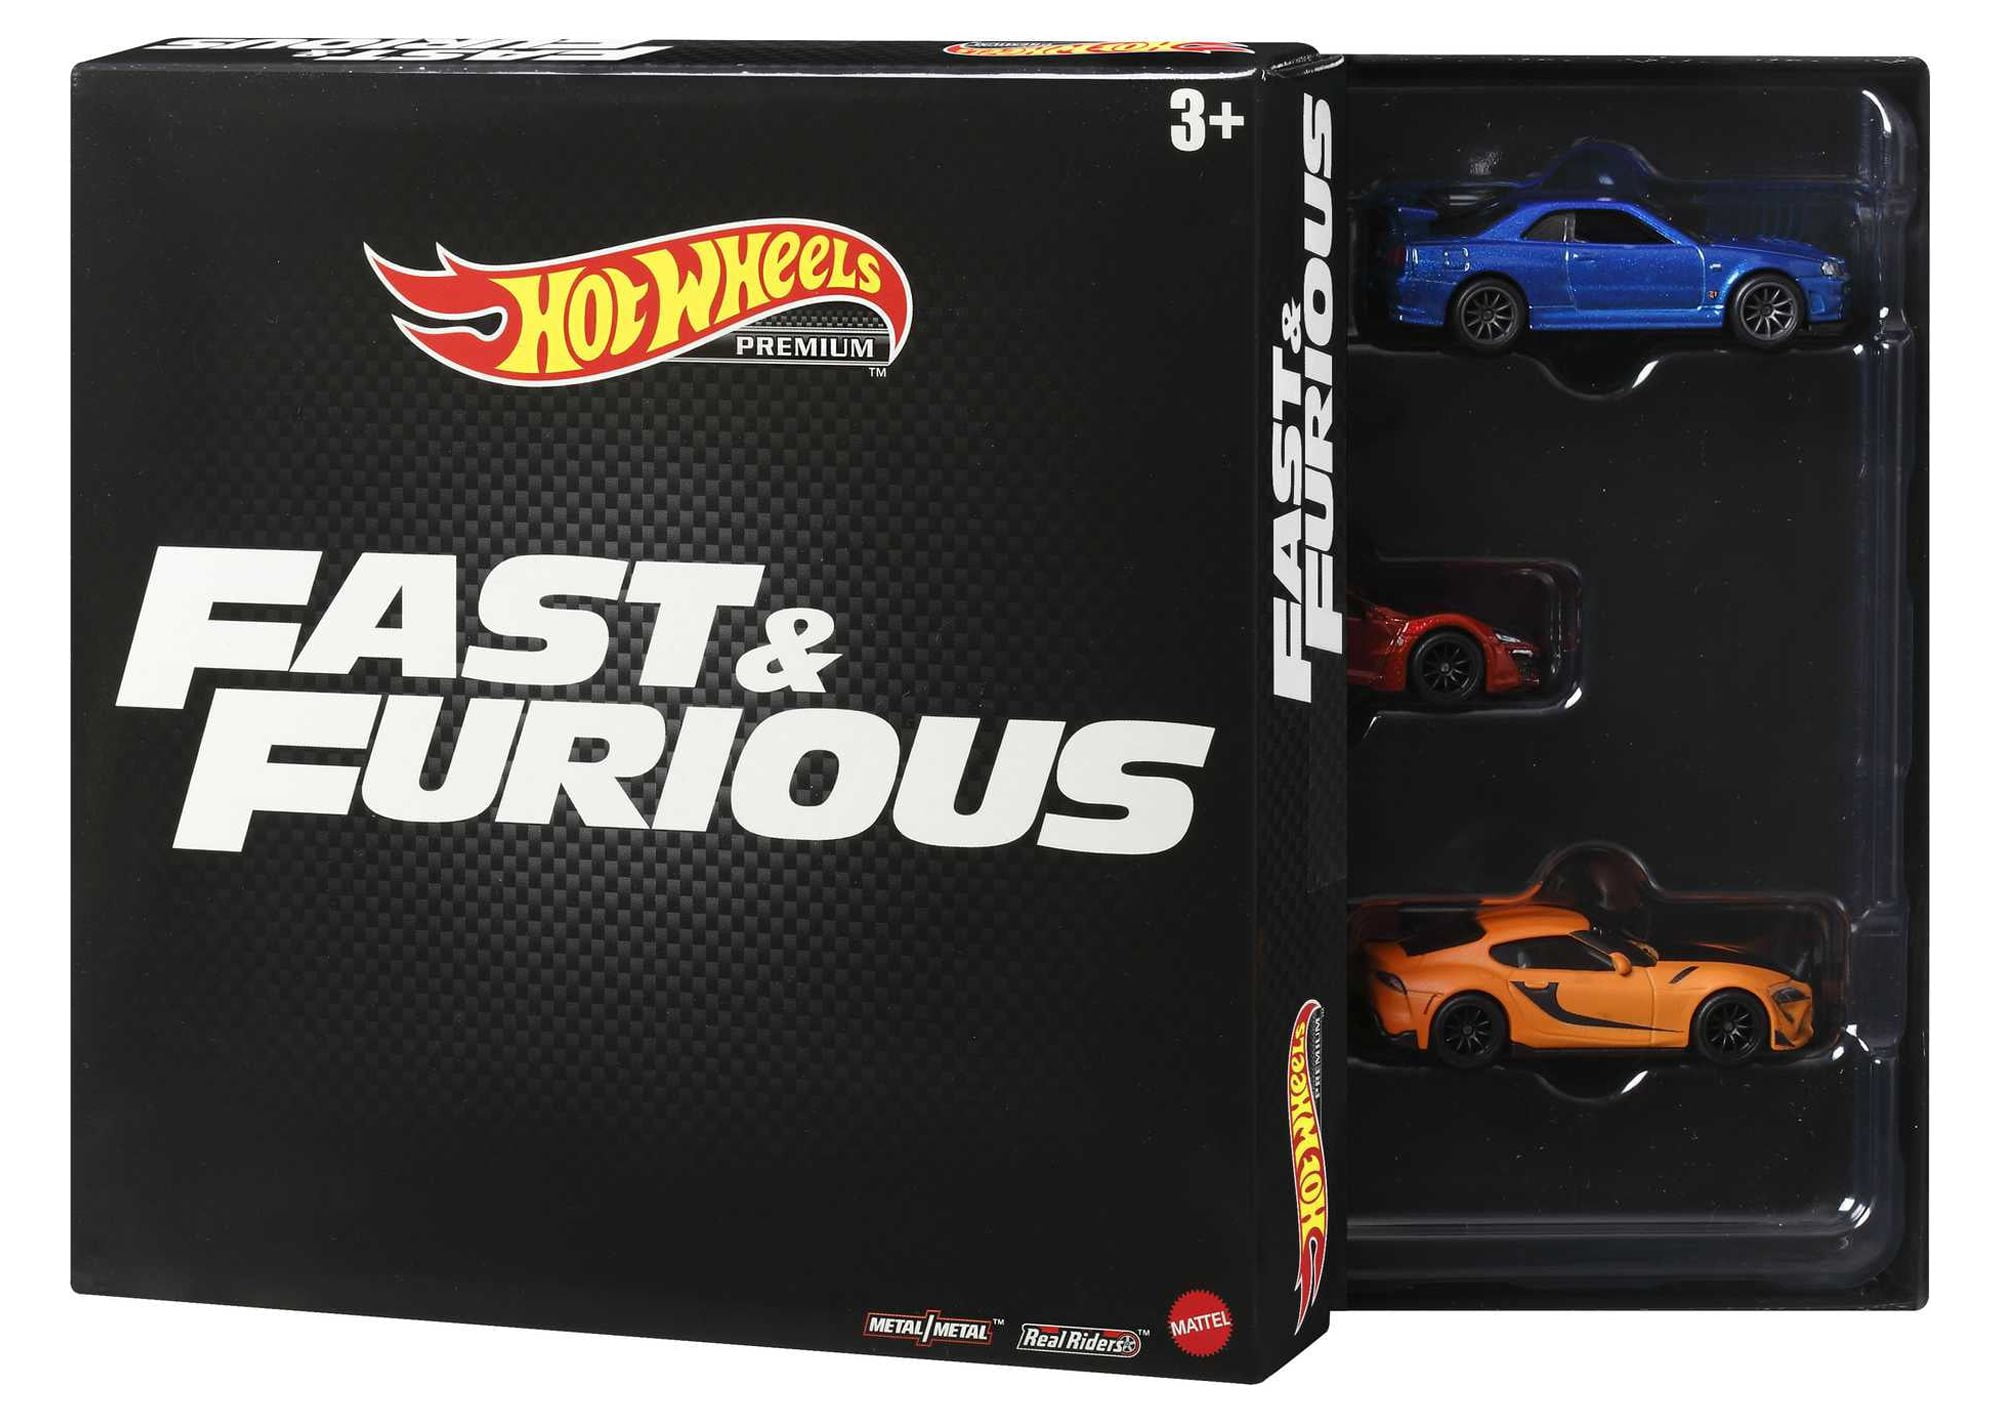 Hot Wheels Fast & Furious Premium Bundle of 5 1:64 Scale Toy Cars